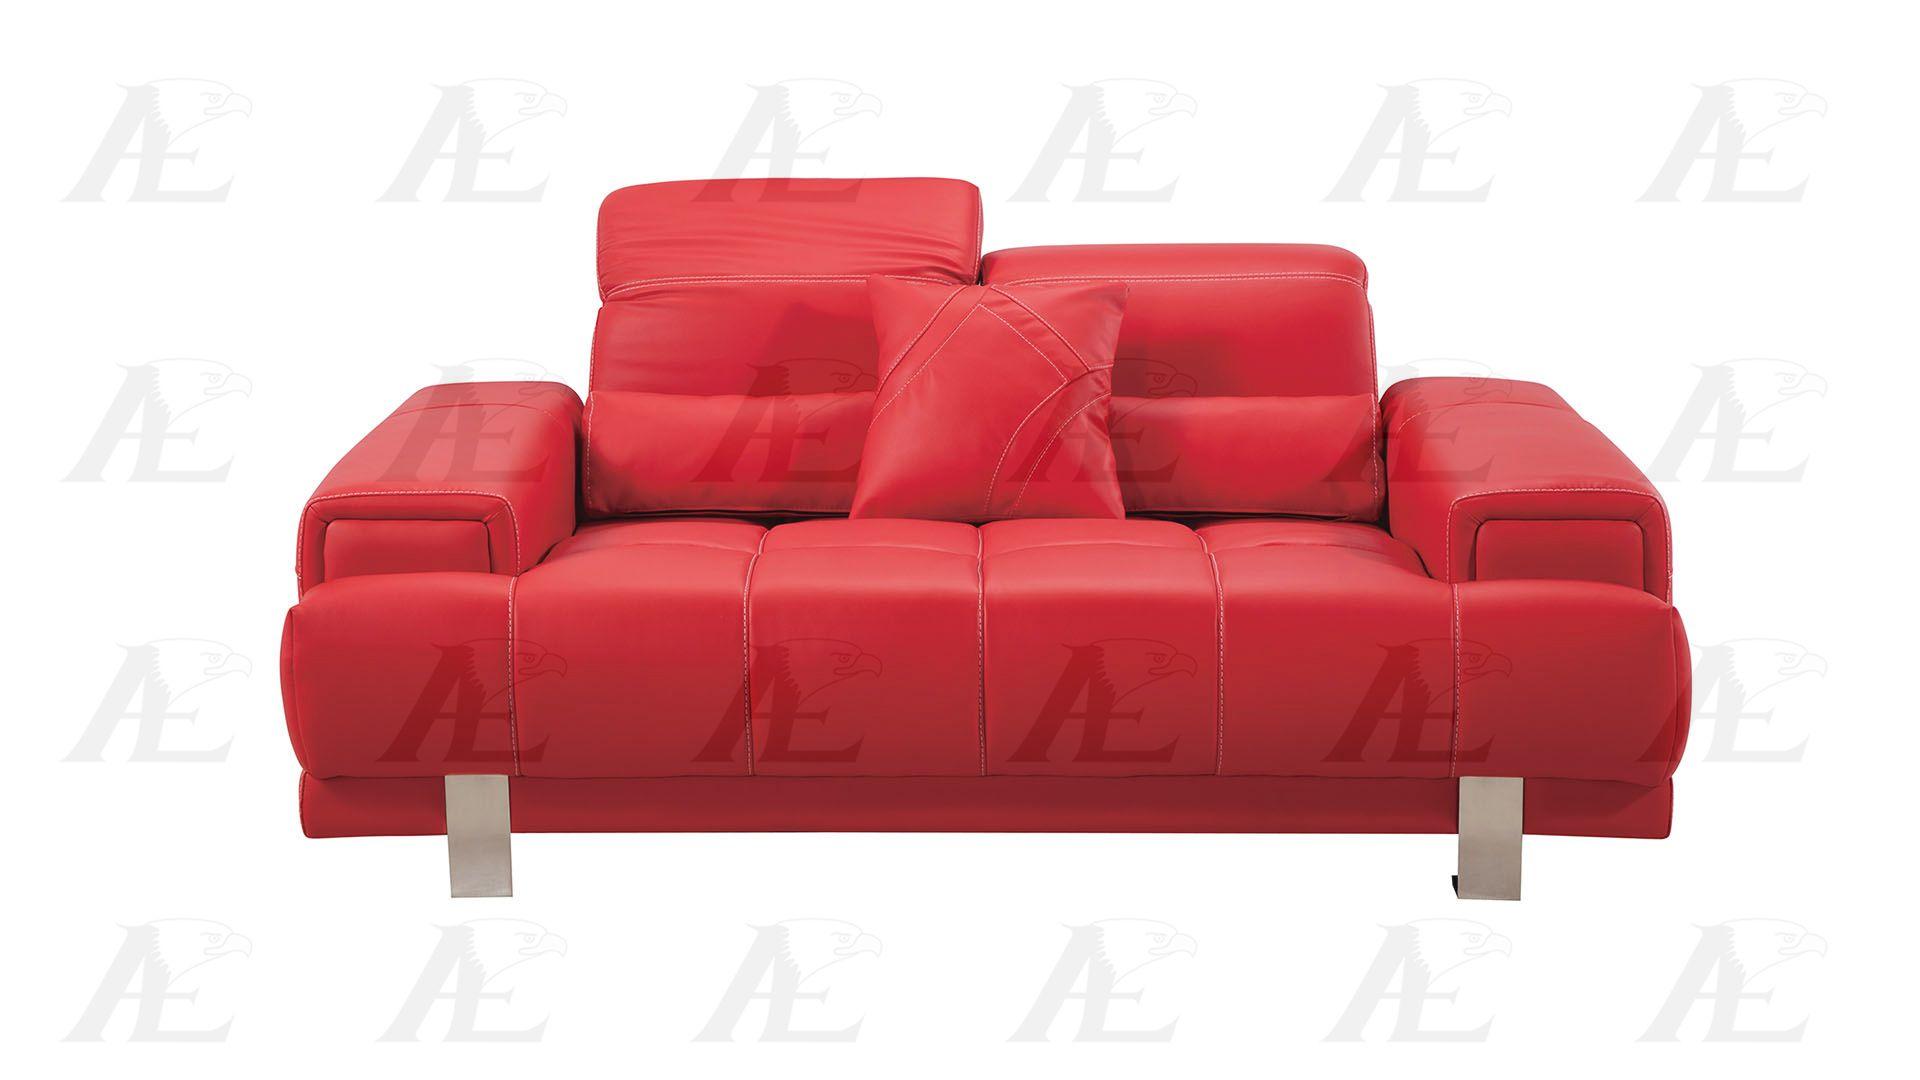 

                    
American Eagle Furniture AE606-RED Sofa Loveseat and Chair Set Red Bonded Leather Purchase 
